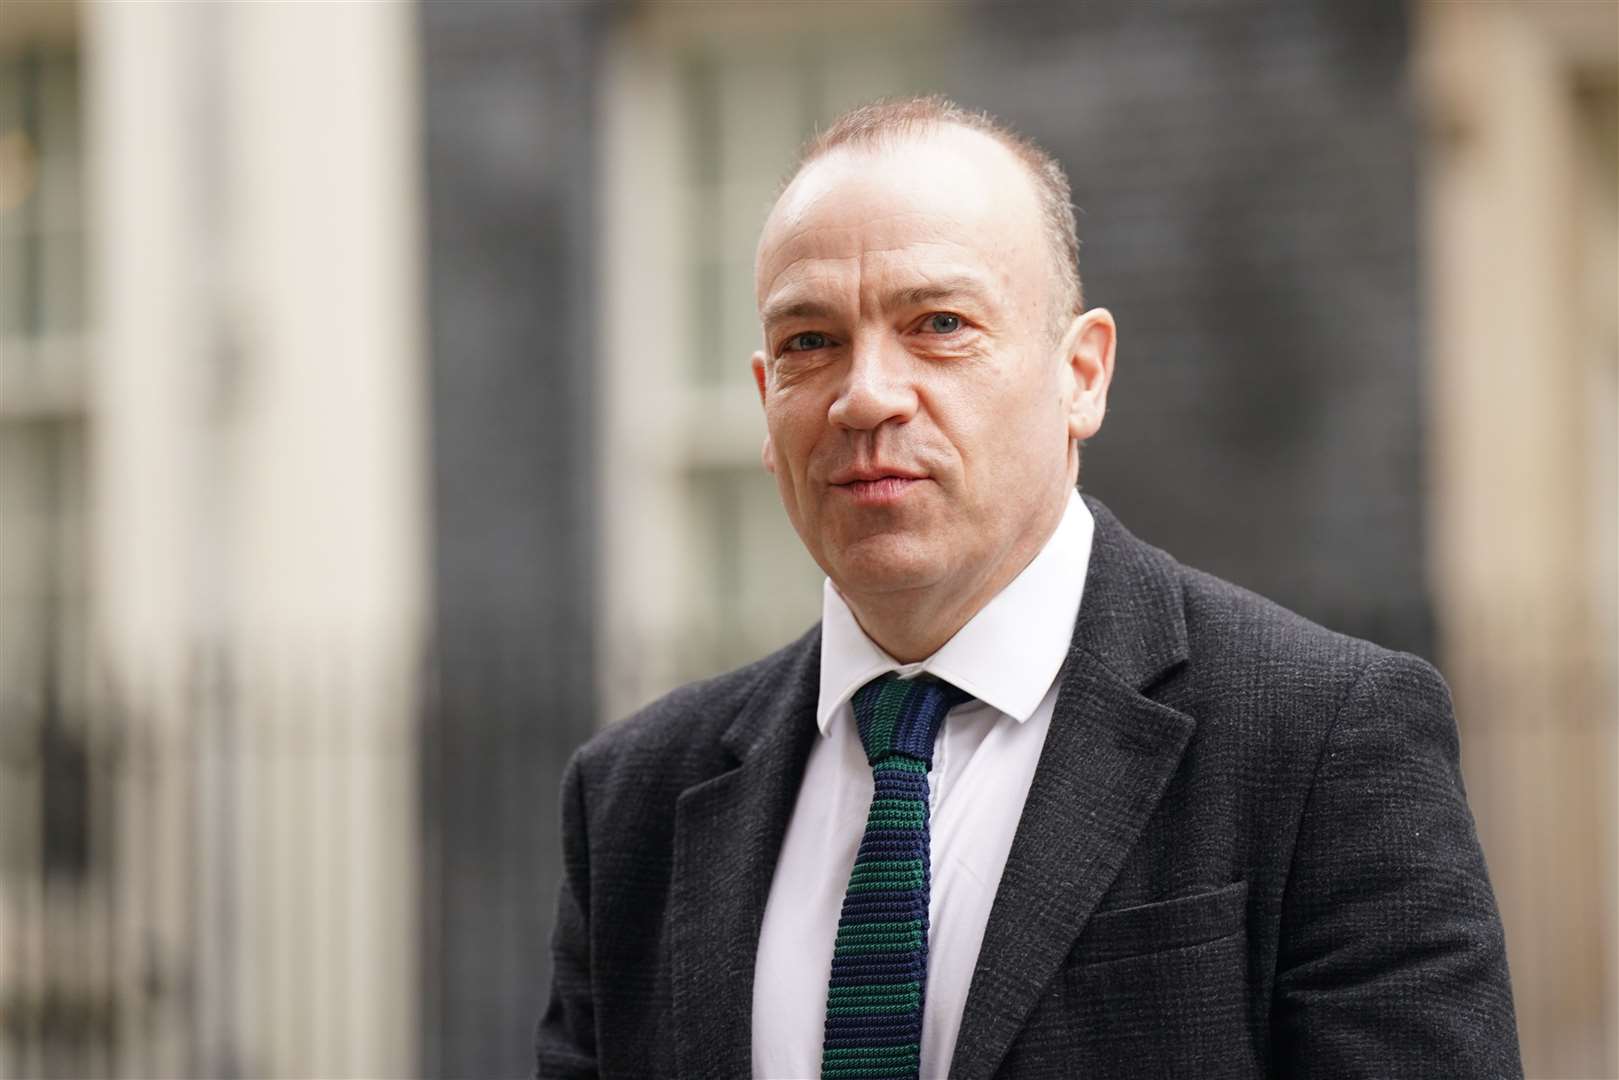 Northern Ireland Secretary Chris Heaton-Harris said that civil servants were working with Stormont to upgrade public services (James Manning/PA)